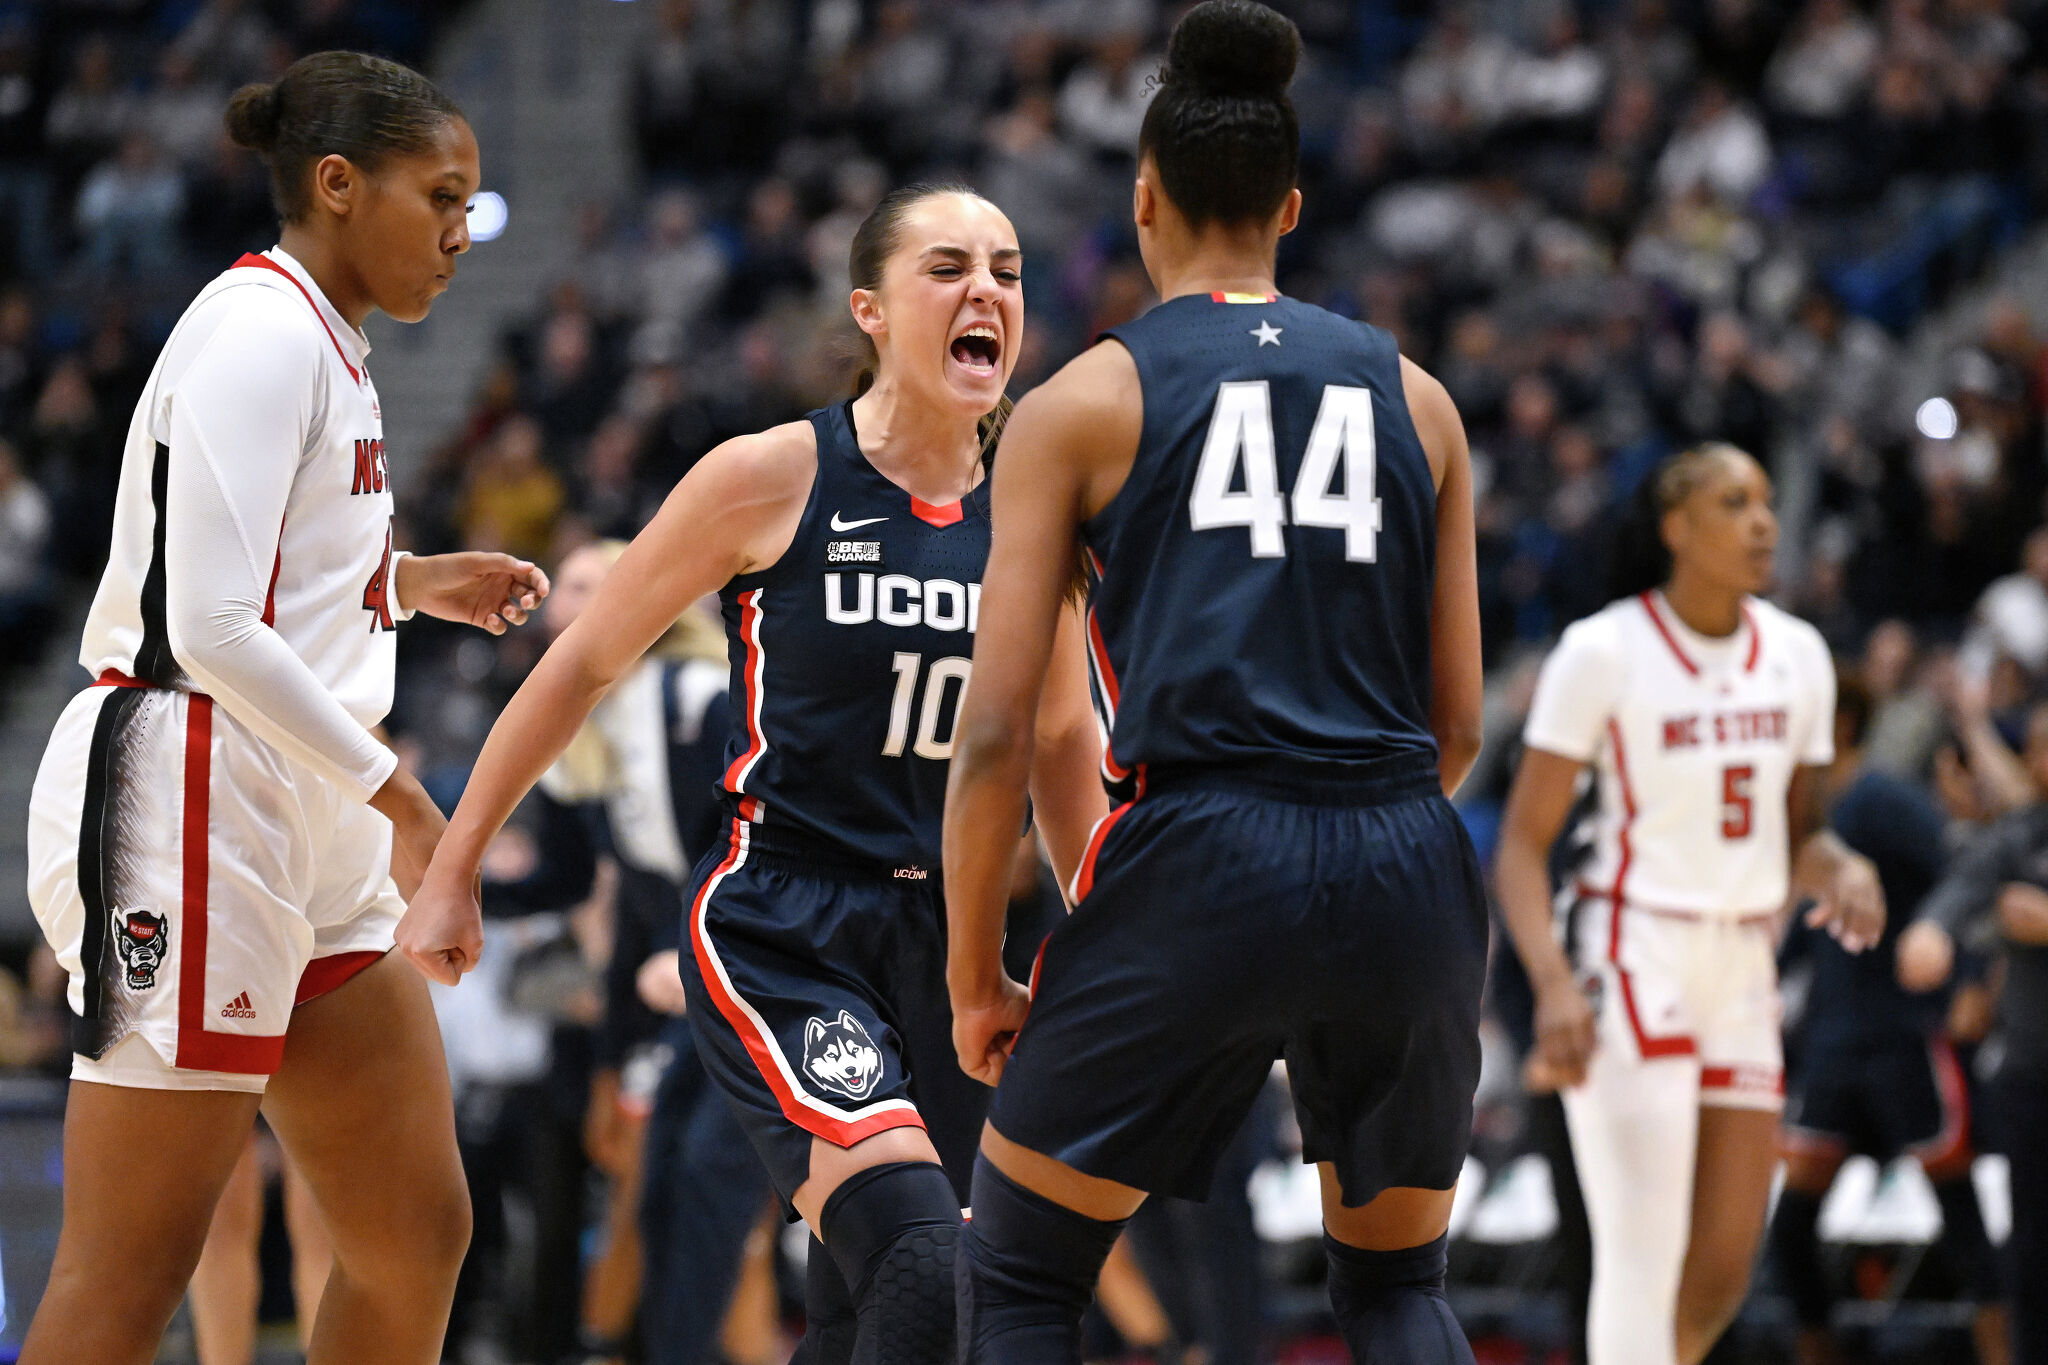 UConn women's basketball could have seven players available Sunday vs